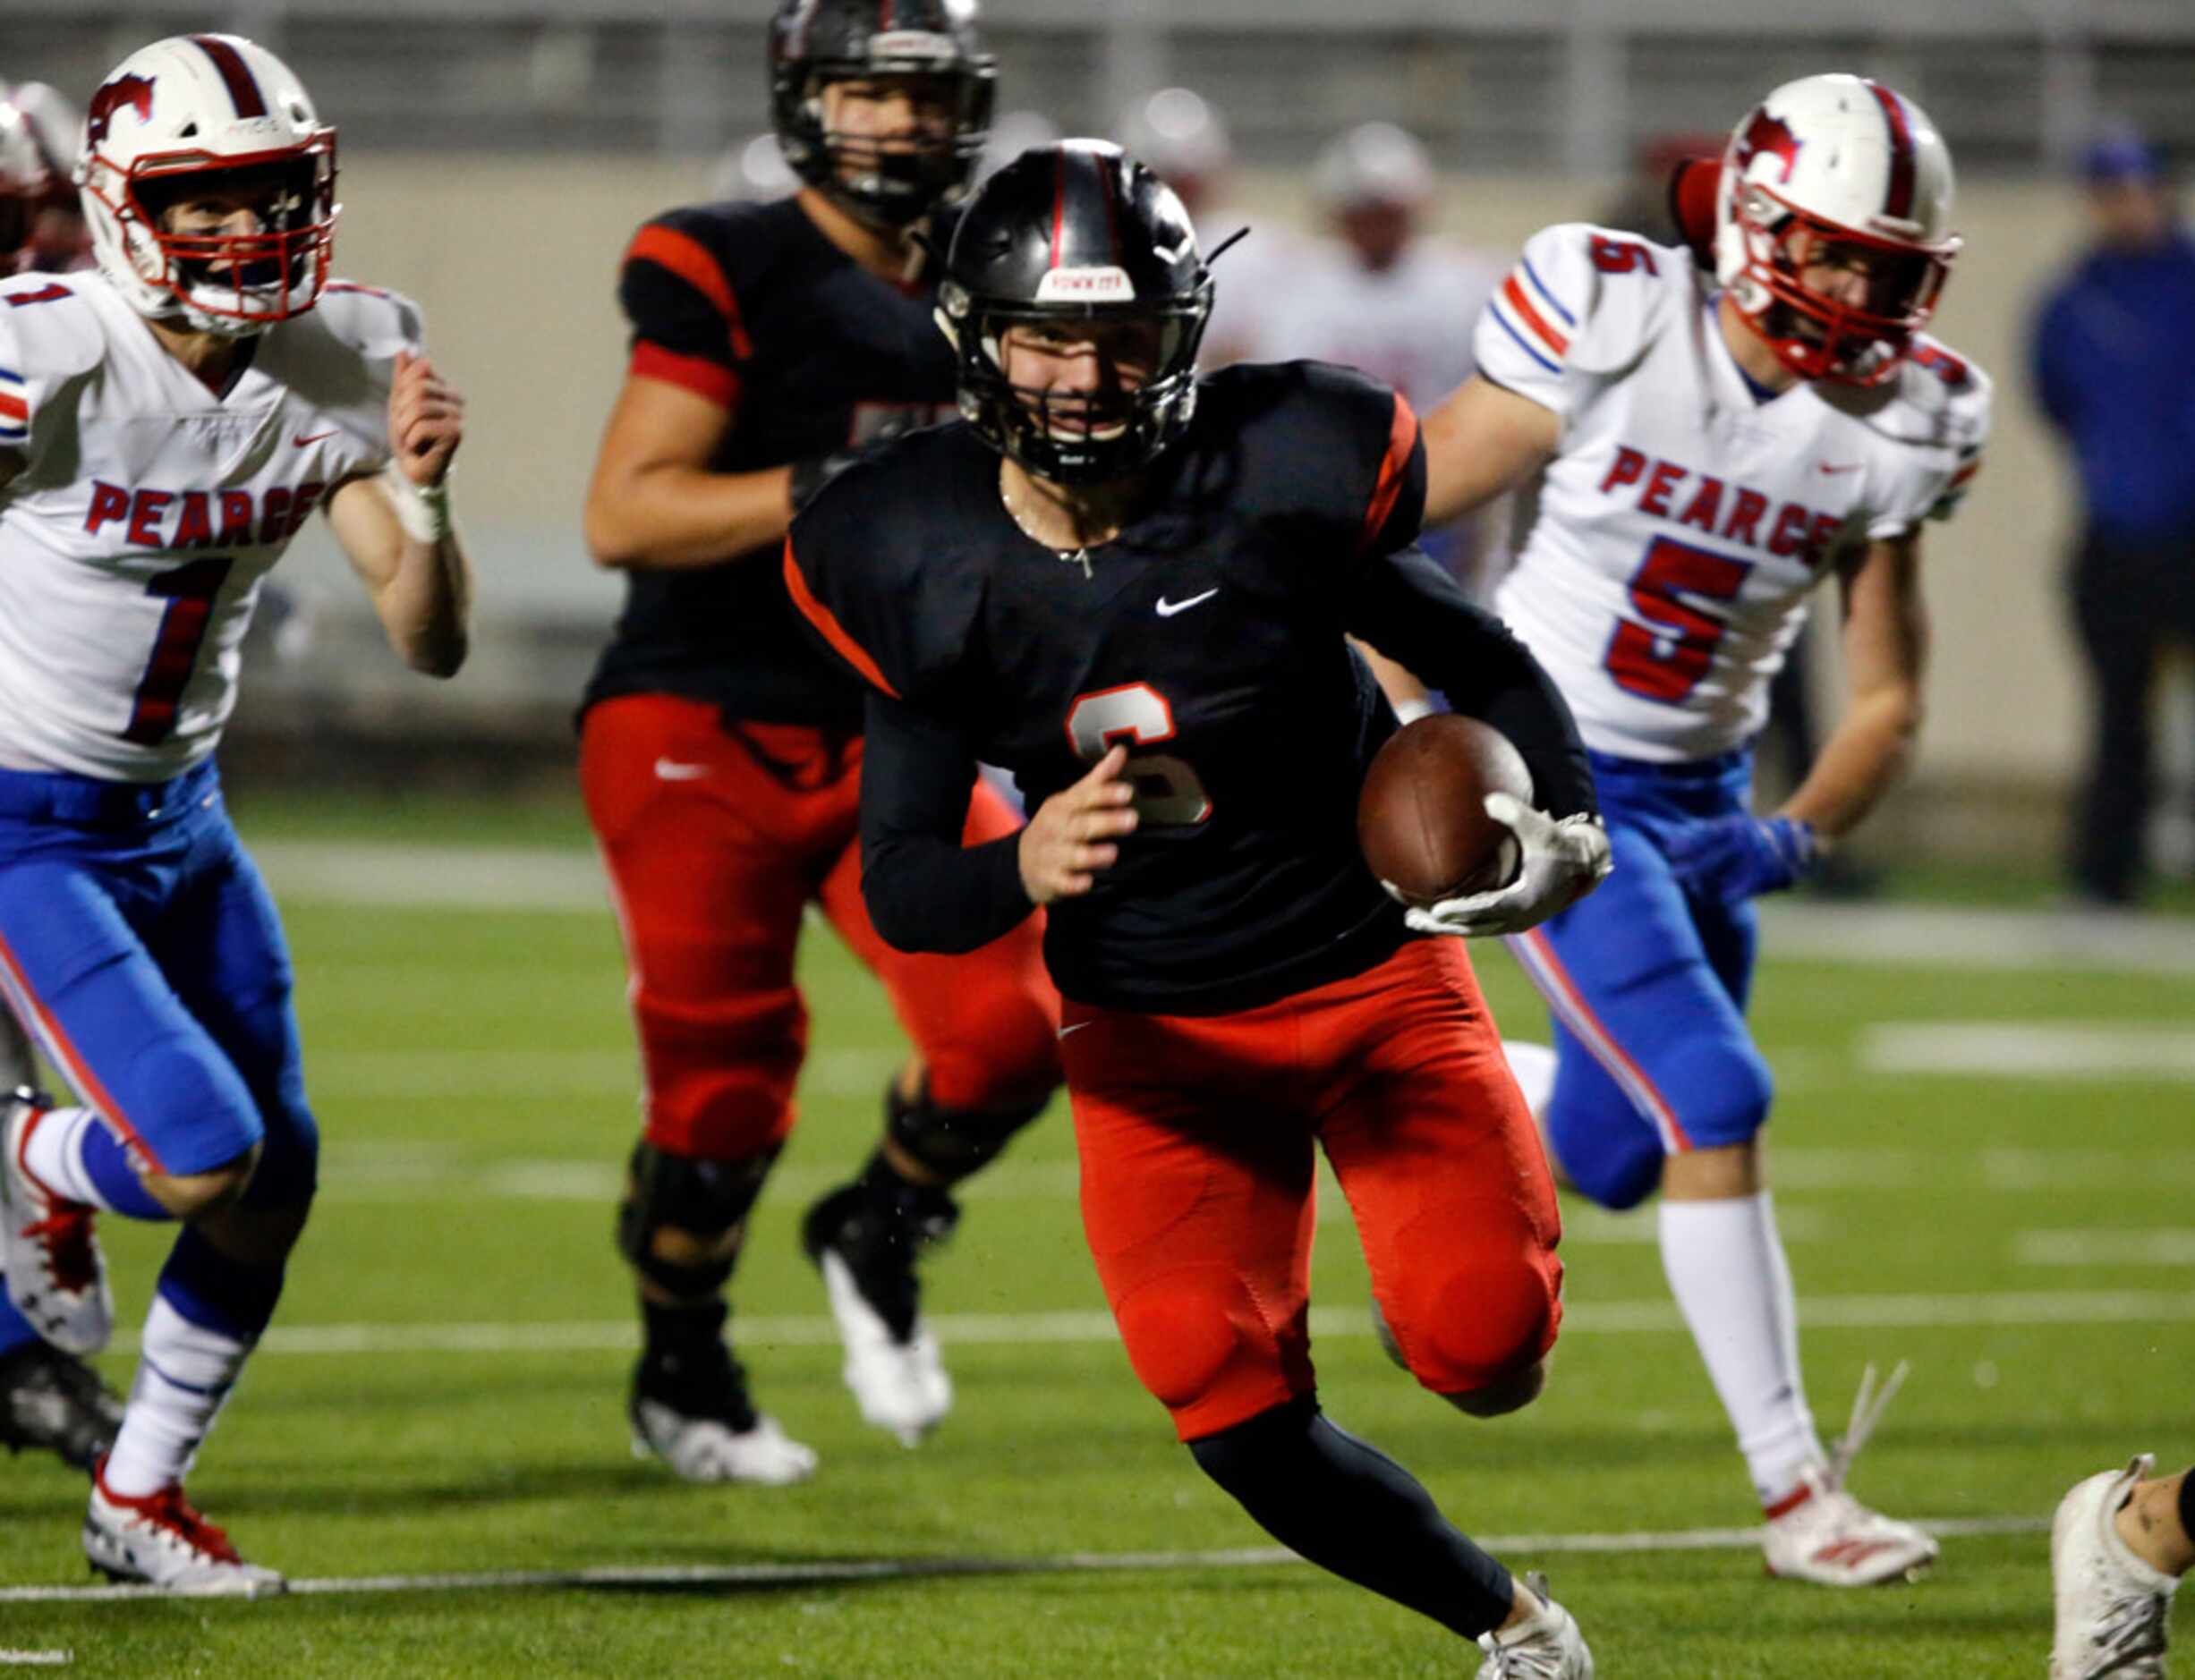 Mitch Coulson (6) runs a for a touchdown during the first half of the Richardson Pearce Vs....